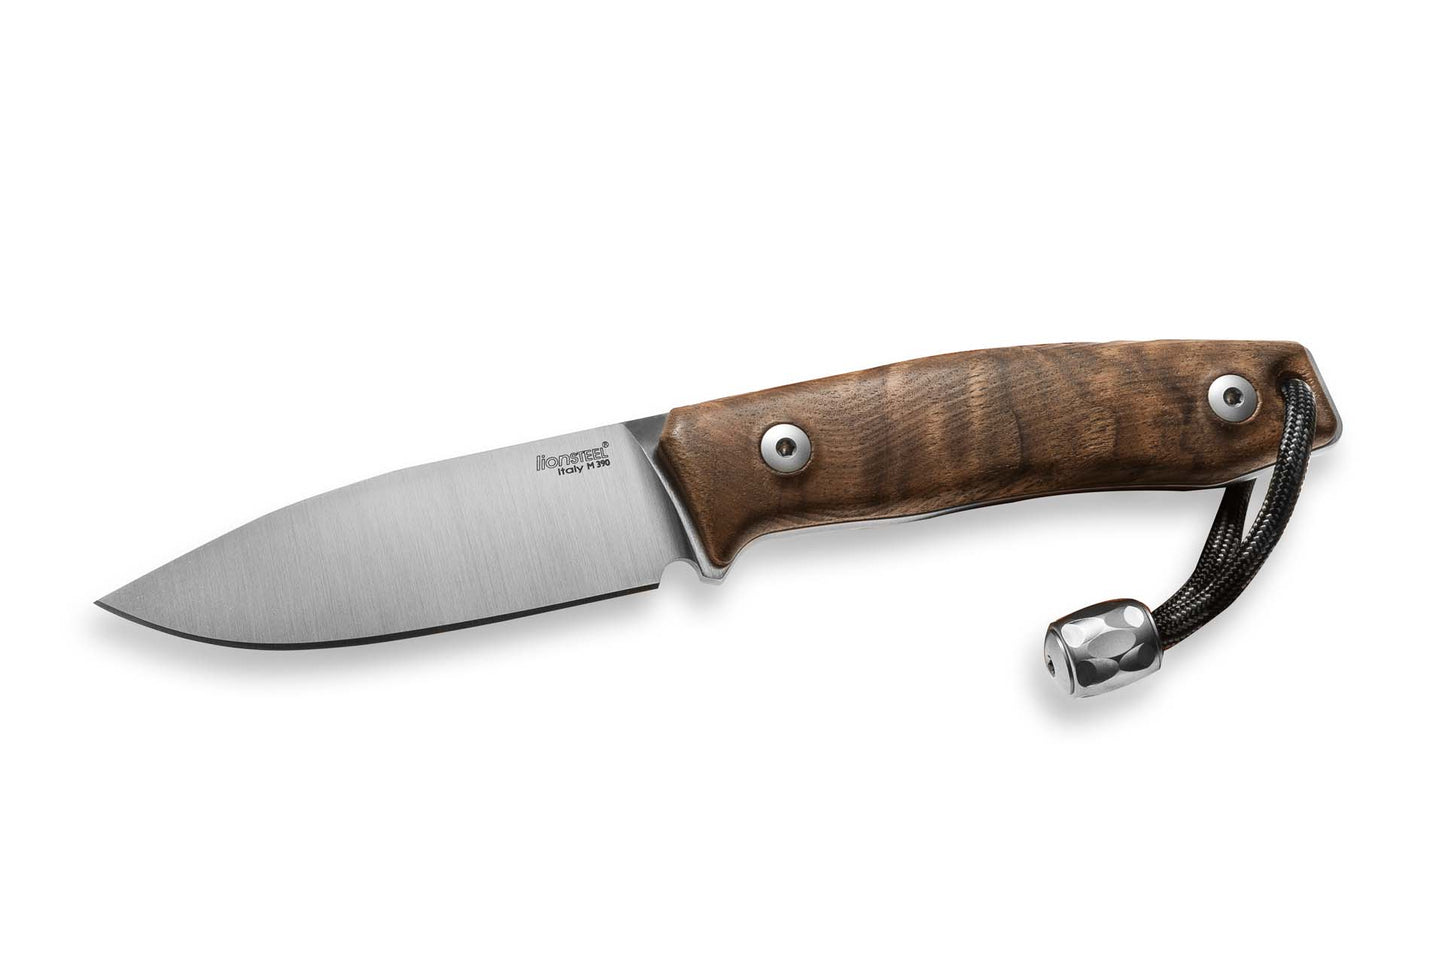 LionSteel M1 2.91" M390 Walnut Wood Fixed Blade Knife with Leather Sheath and Titanium Bead